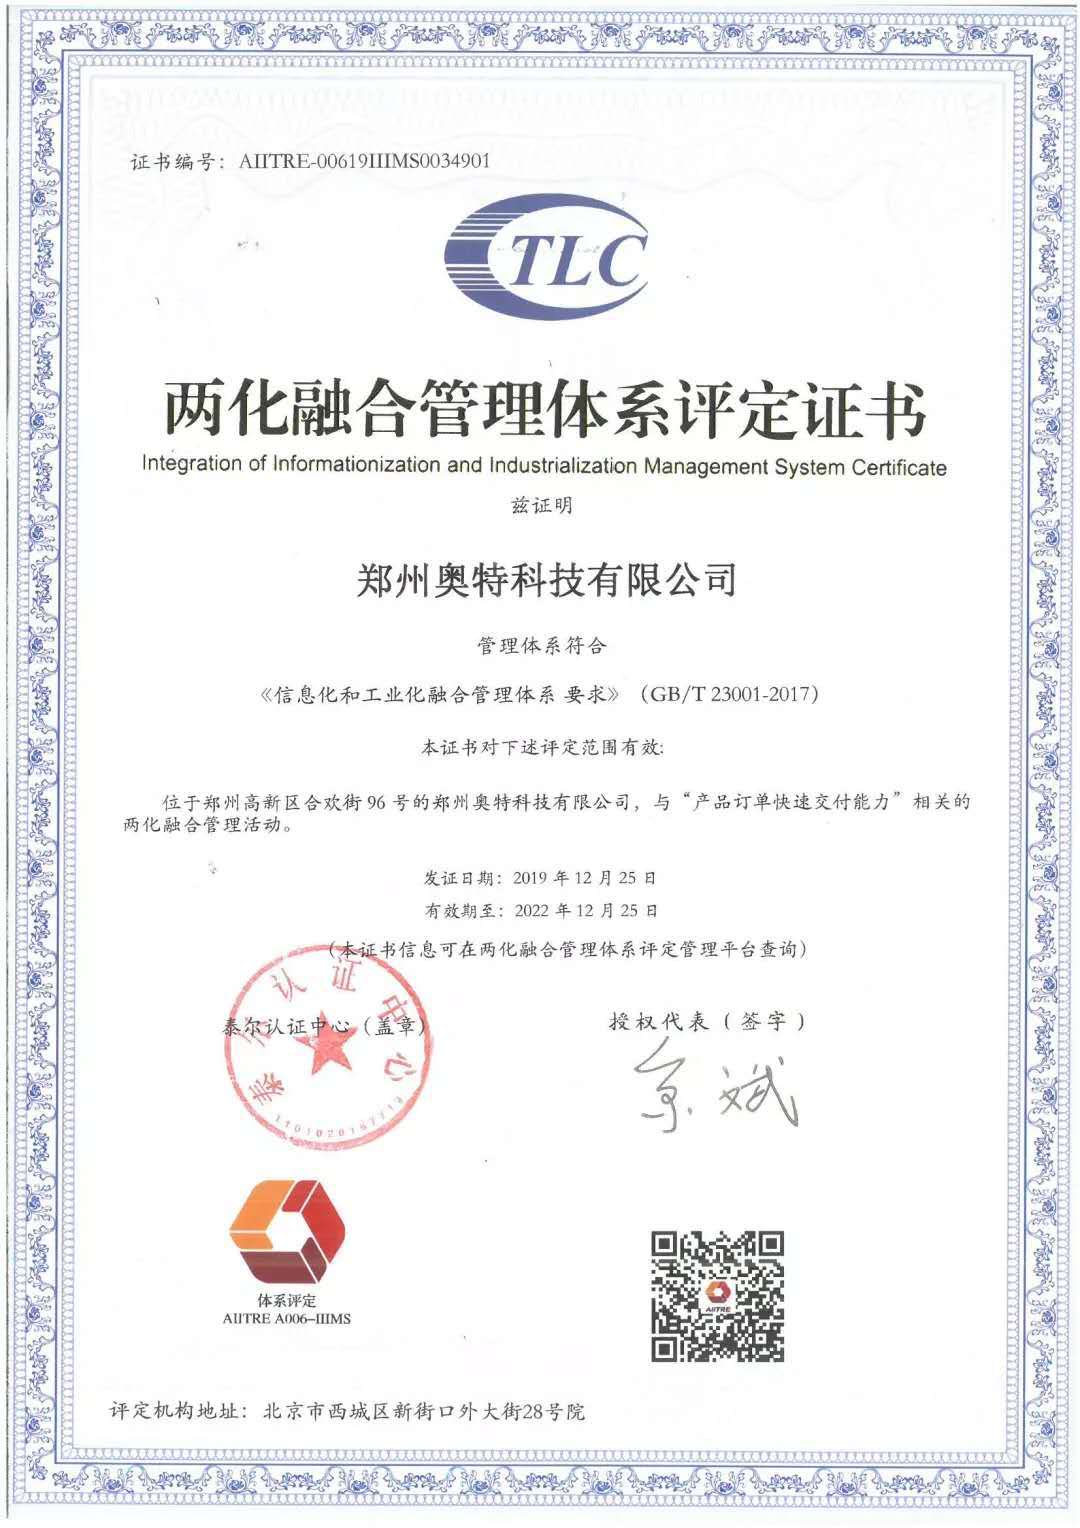 Evaluation Certificate of Integrated Management System